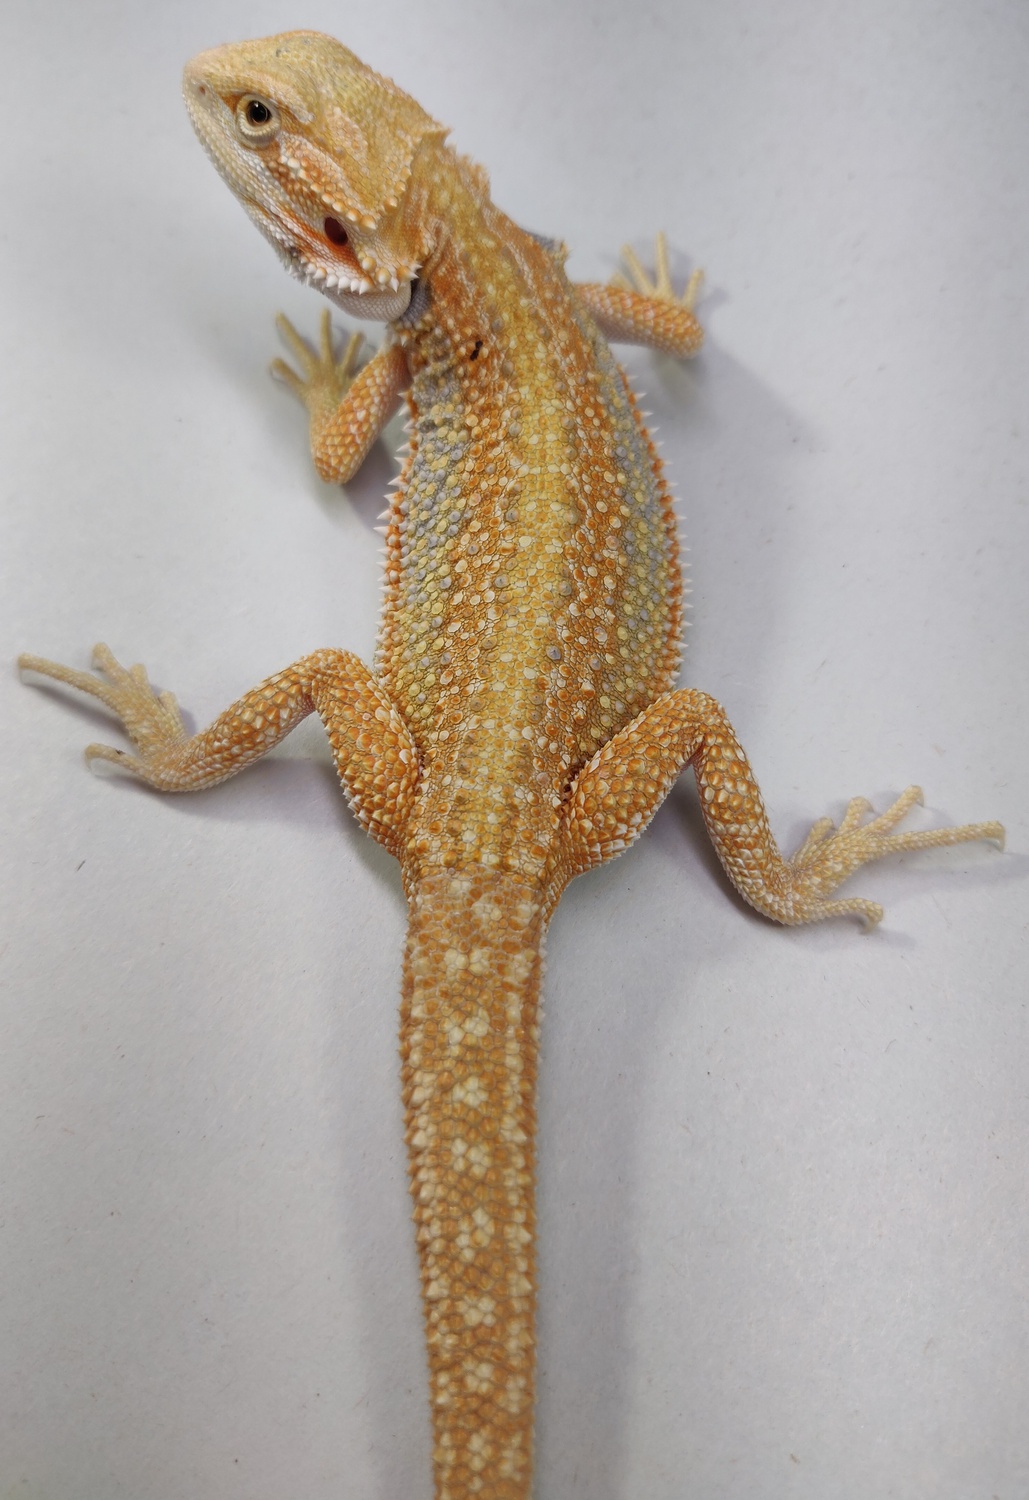 Hypo Dunner 100% Het Wits/RecL (Phantom Leather)/trans Central Bearded Dragon by Phantom Dragons, Inc.